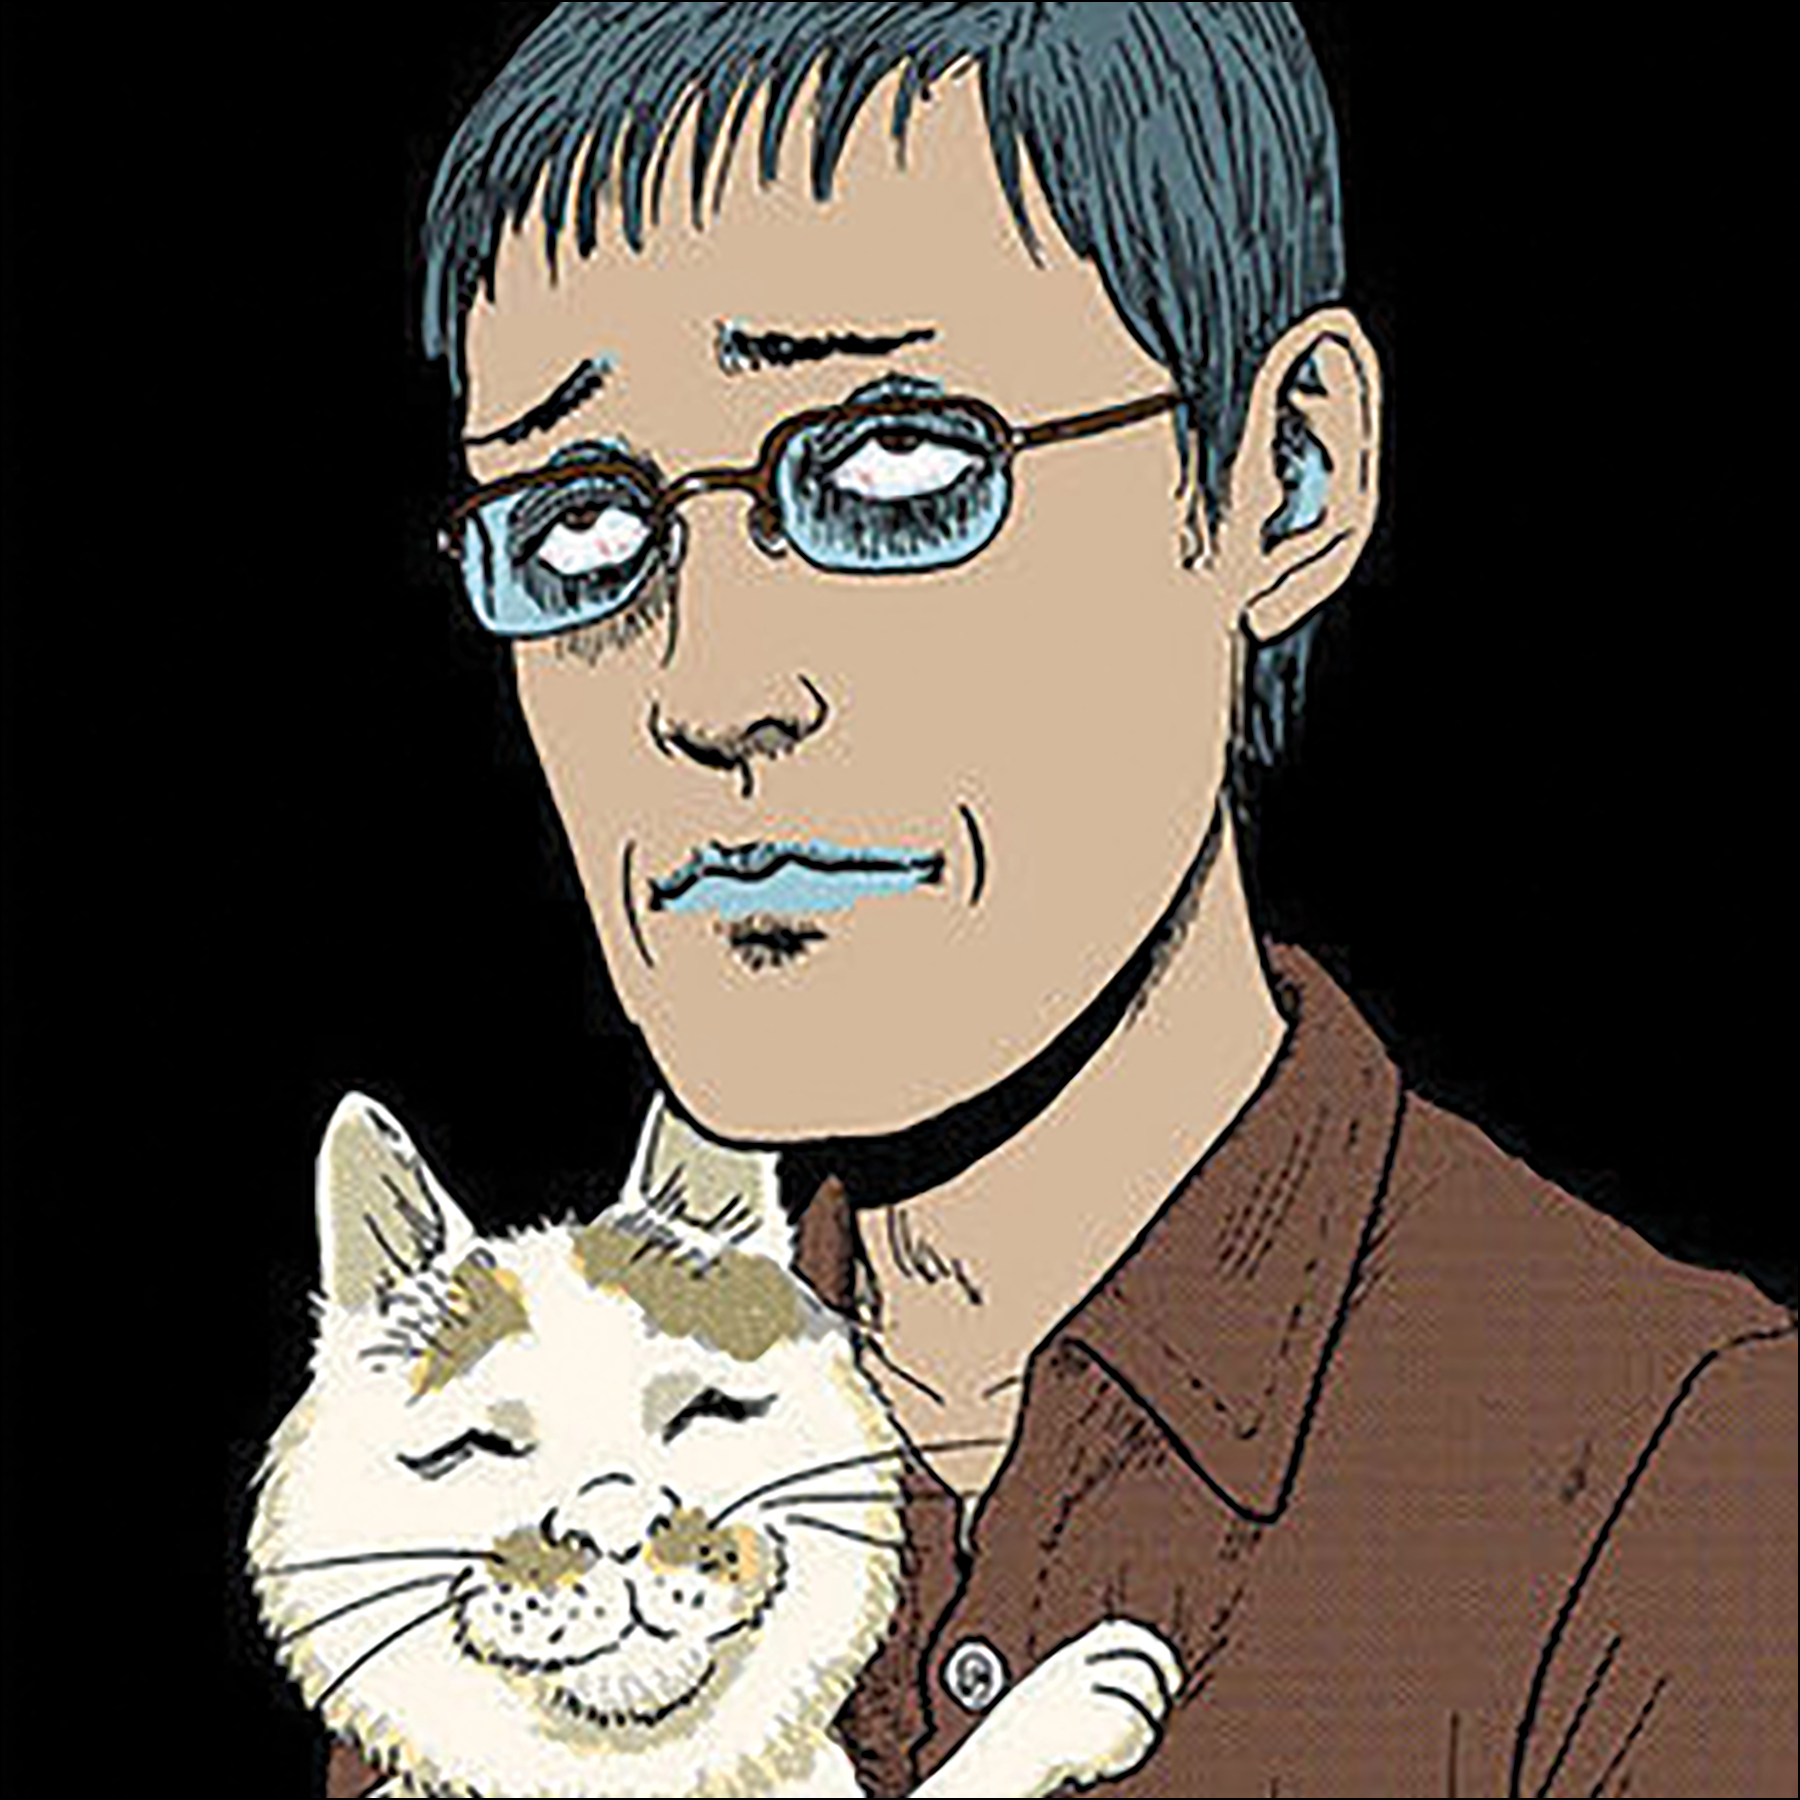 Anime Central TNT - Introducing Junji Ito Manga Collection 〣( ºΔº )〣 Junji  Ito is a Japanese horror mangaka. Some of his most notable works include  Tomie, a series chronicling an immortal